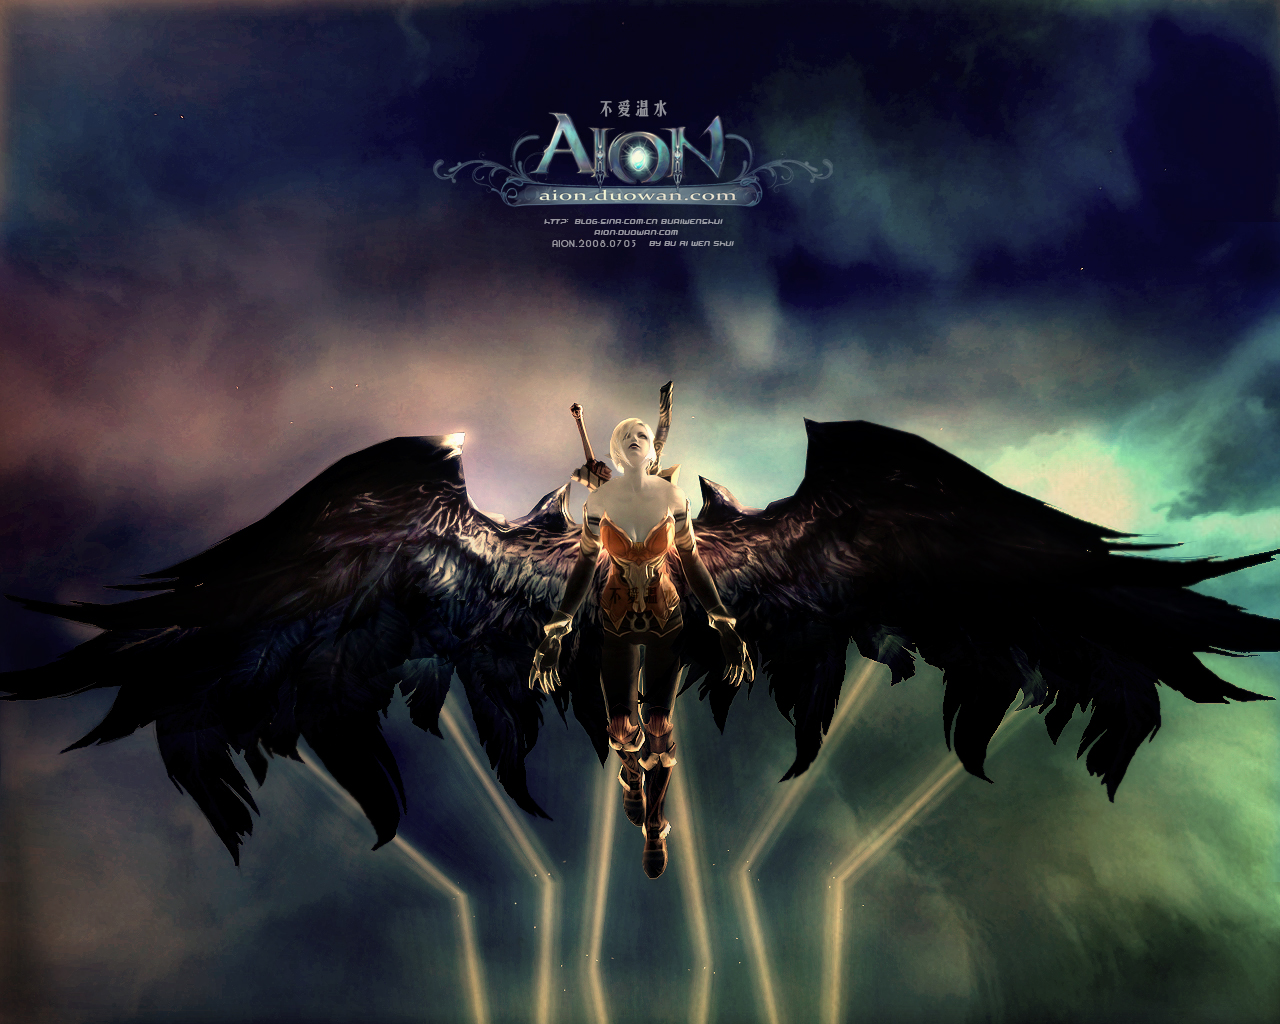 Aion Picture - Image Abyss